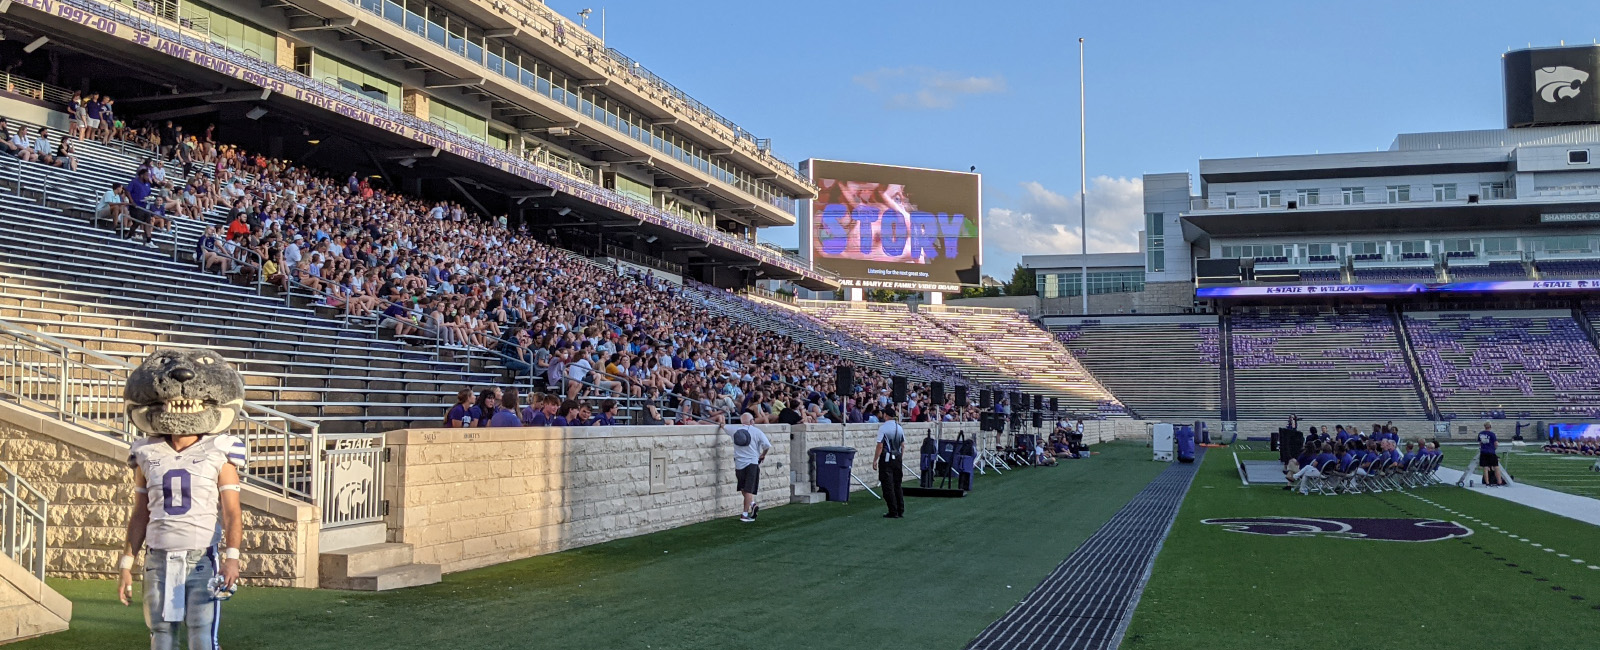 KState Freshman Class from New Student Convocation 2021 in Bill Snyder Family Stadium with Willie the Wildcat in the foreground